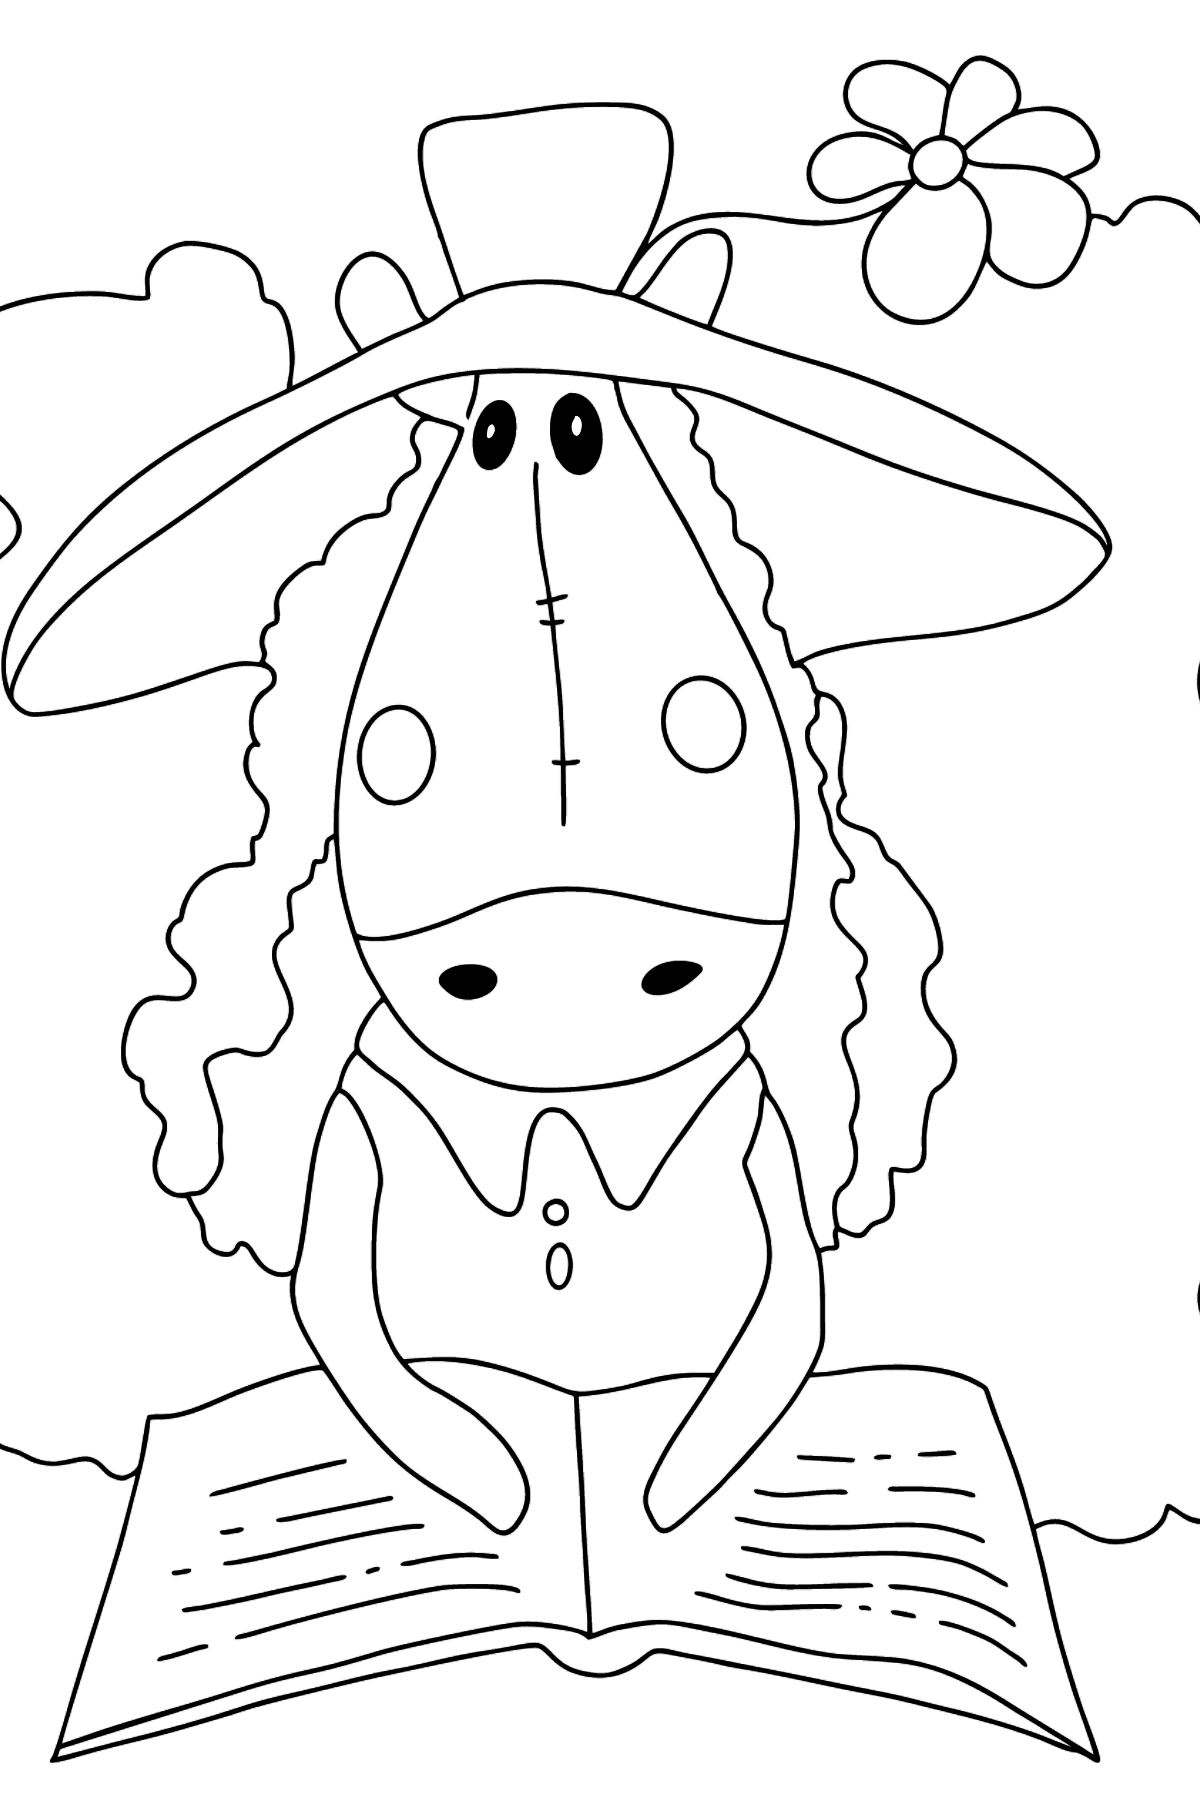 Complex coloring page a horse with book - Coloring Pages for Kids